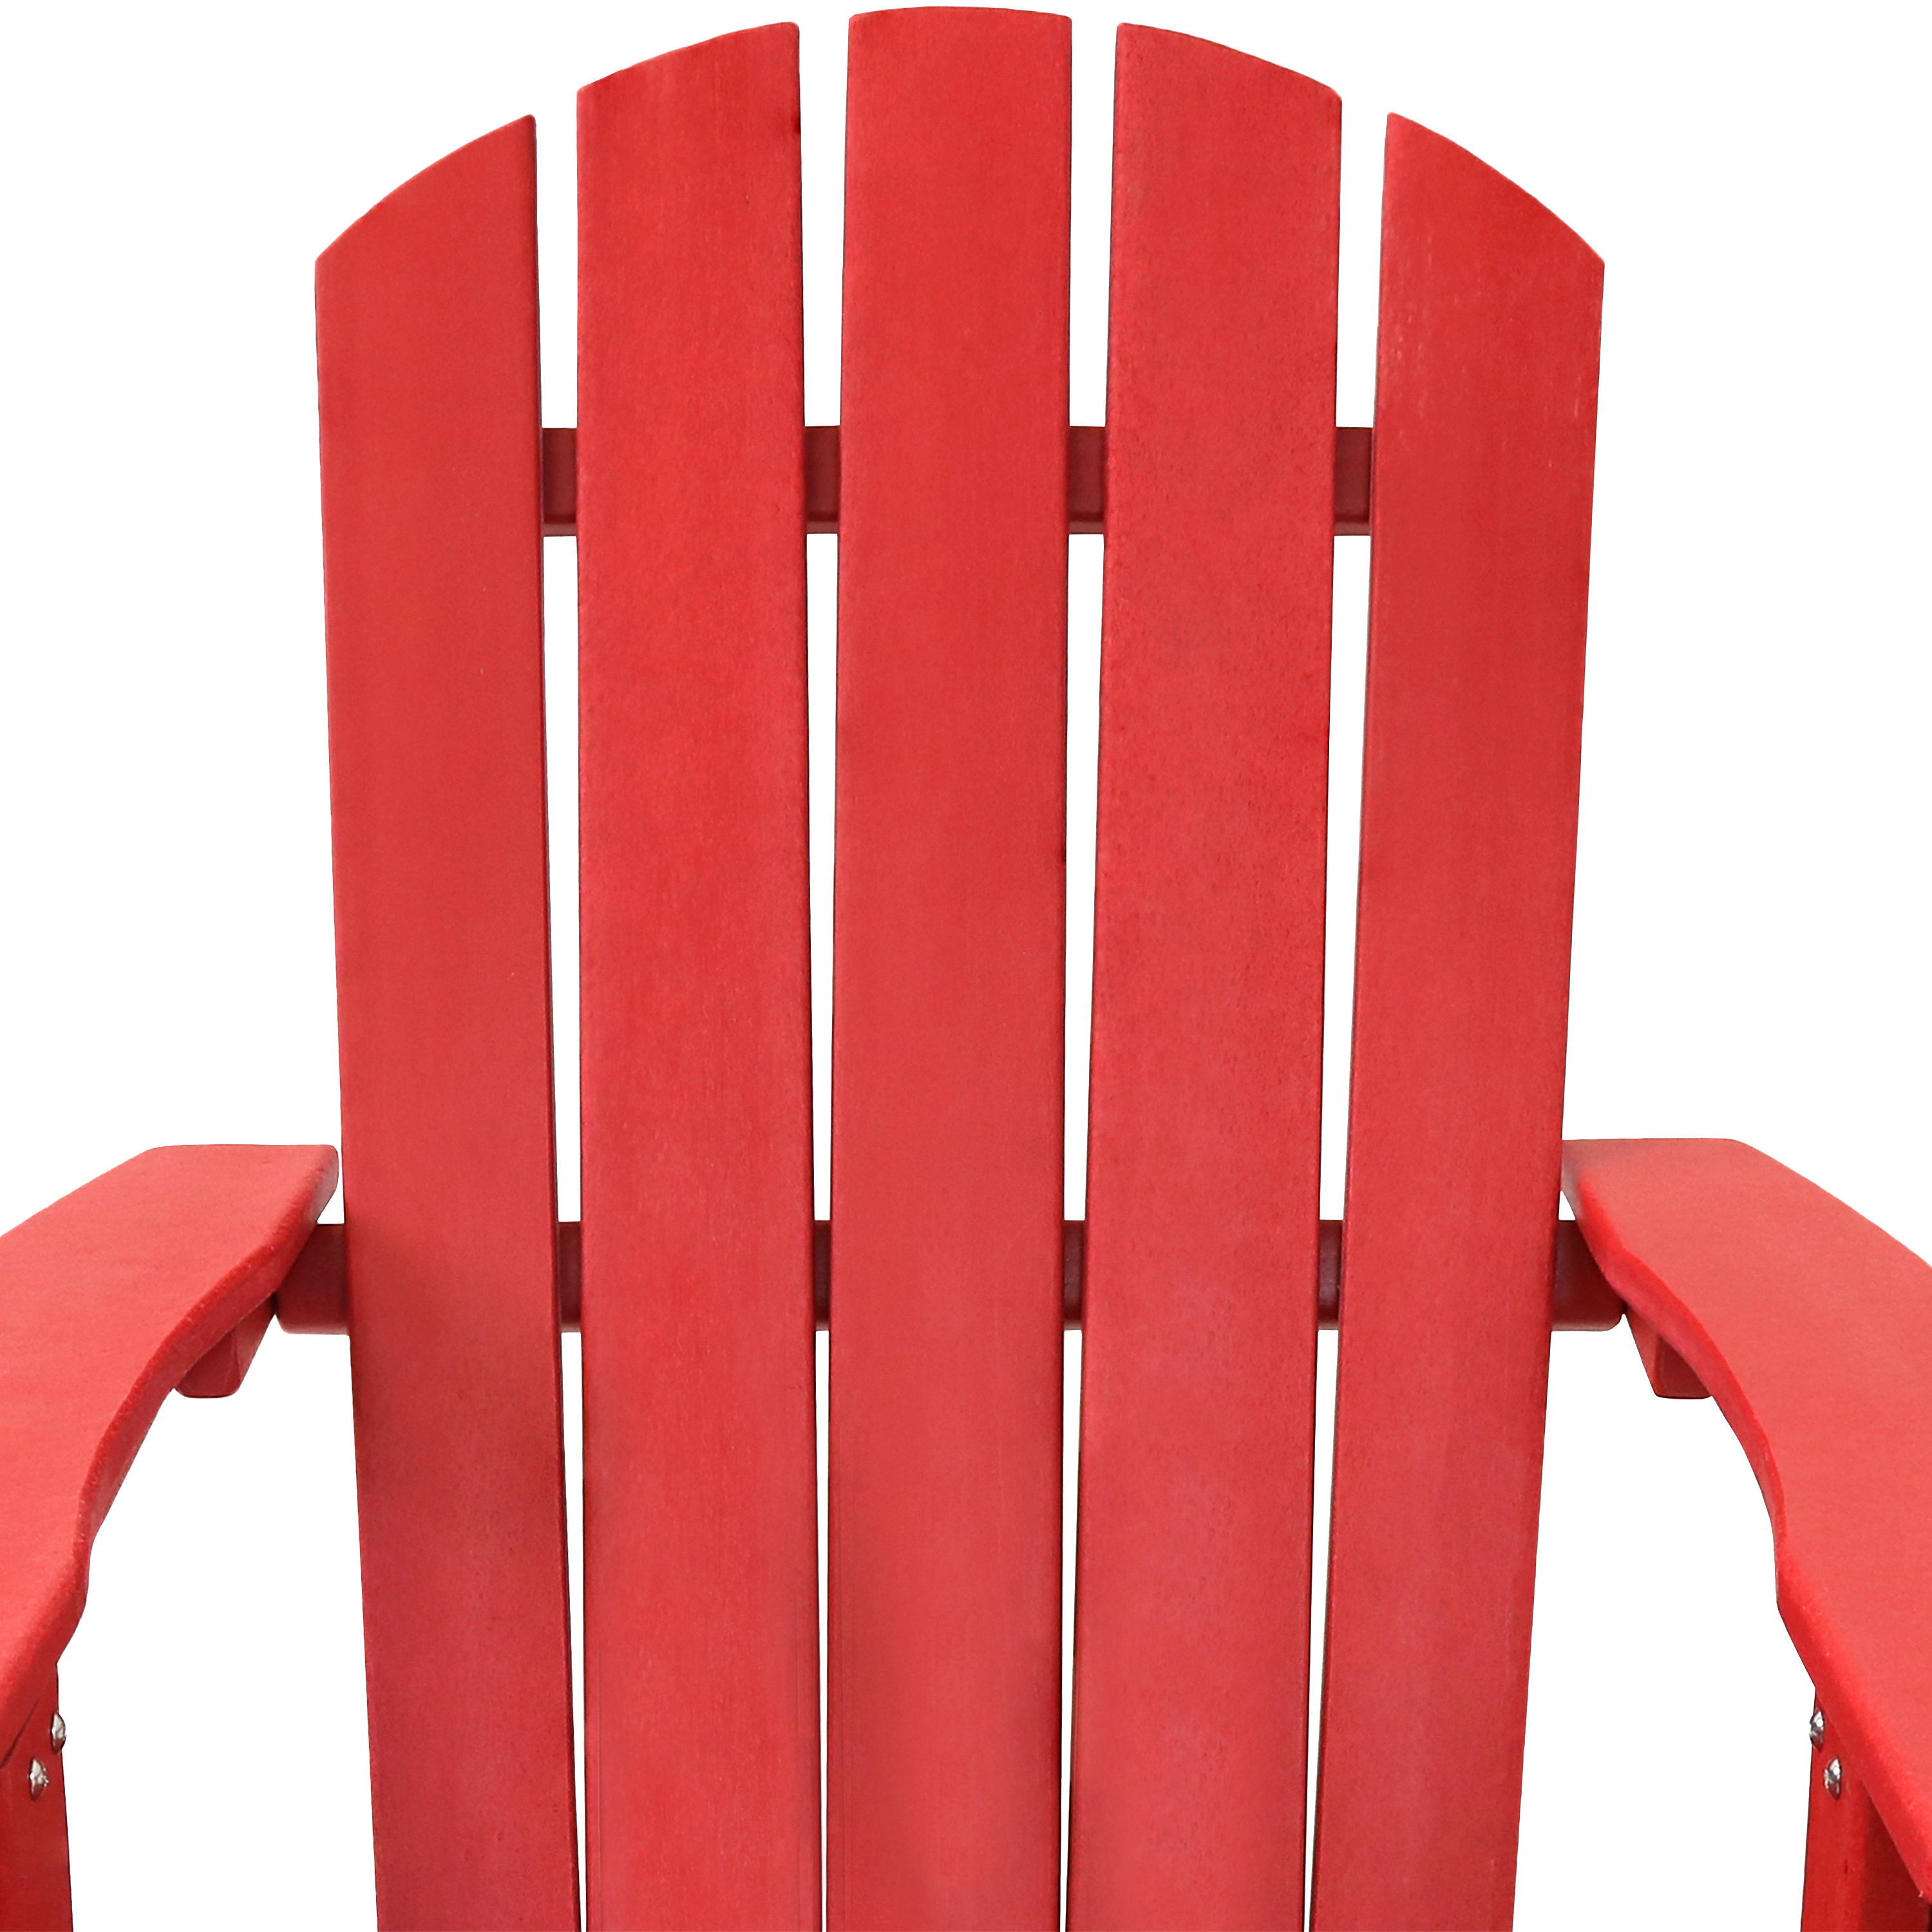 Sunnydaze All-Weather Outdoor Adirondack Chair with Drink Holder - Heavy Duty HDPE Weatherproof Patio Chair - Ideal for Lawn, Garden or Around the Firepit - Red - image 4 of 7